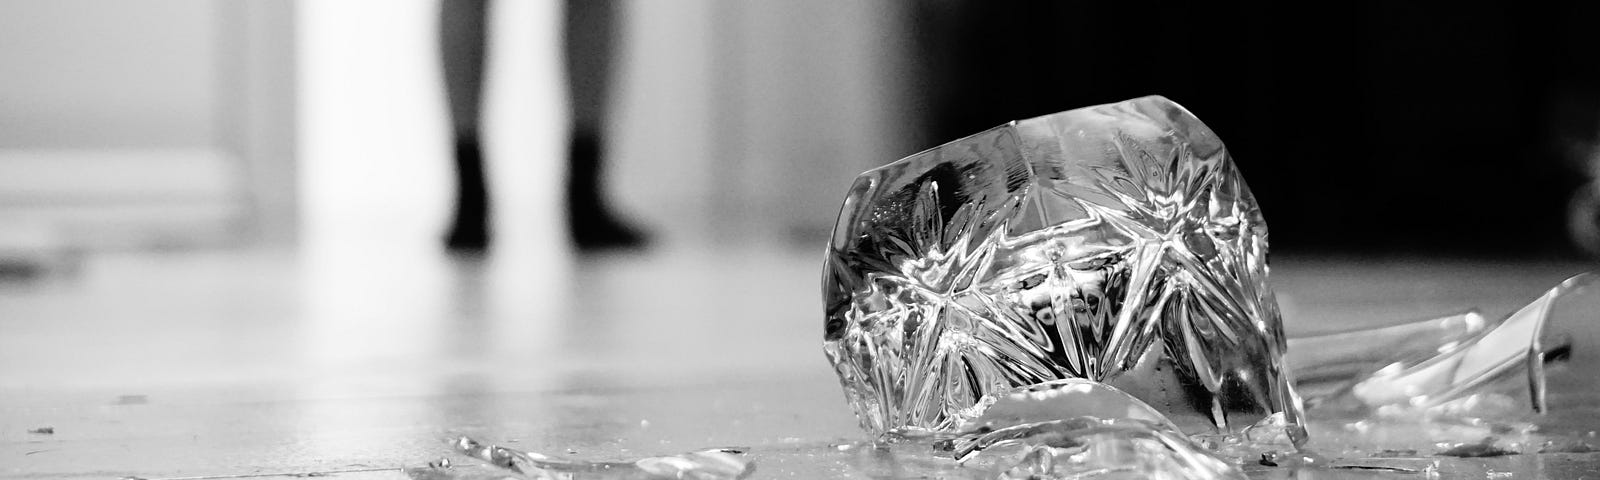 Black and white picture of a broken decrorative glass in the foreground and the legs of a person blurred in the background